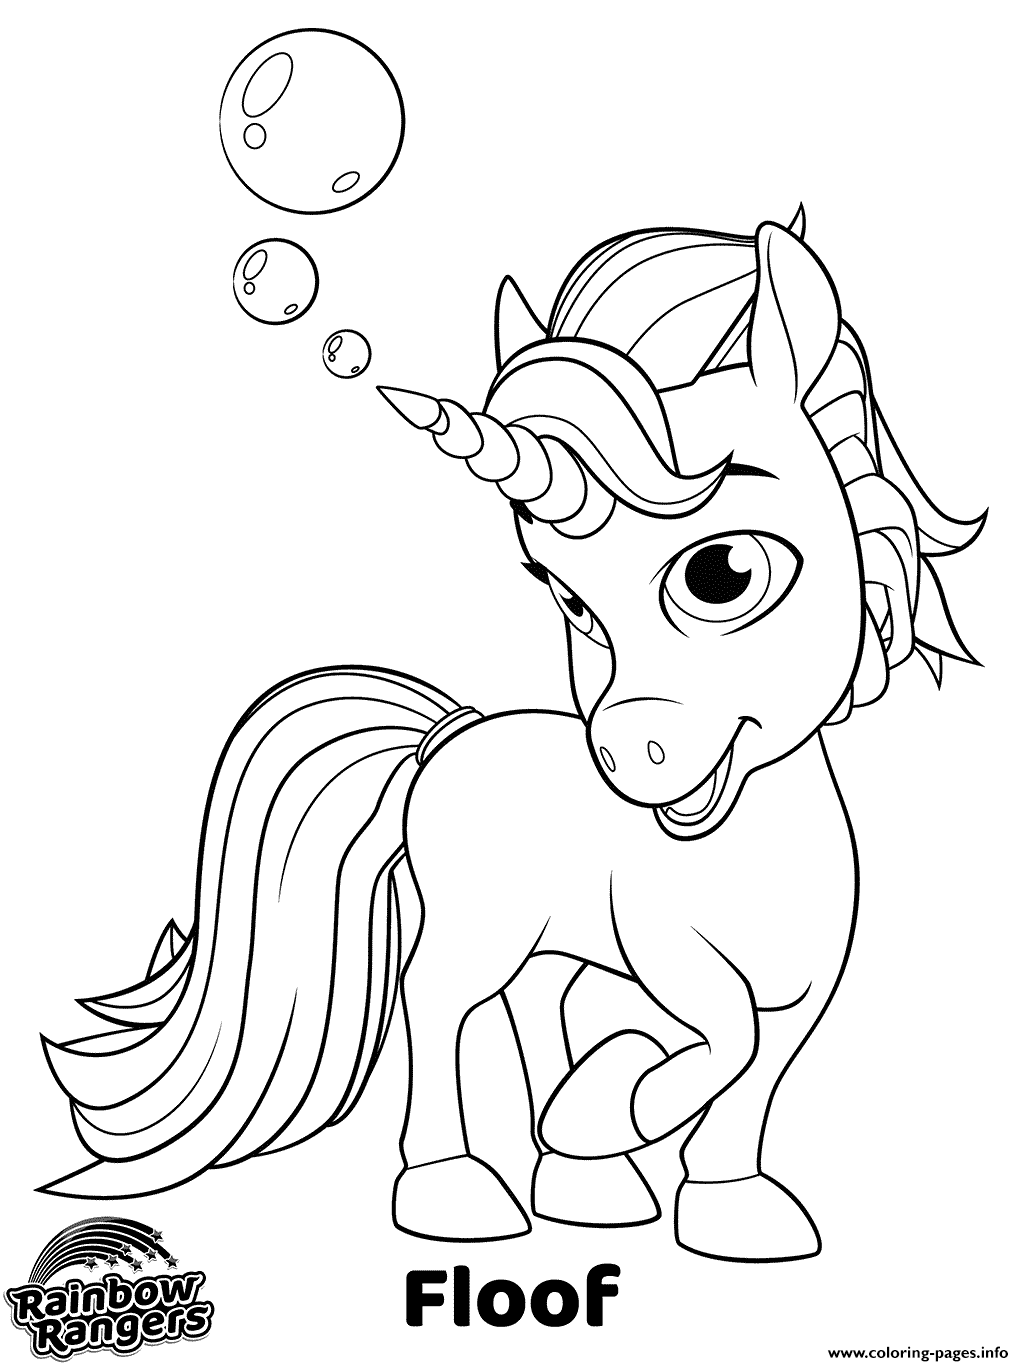 Rainbow Rangers Unicorn Floof Coloring Pages Printable